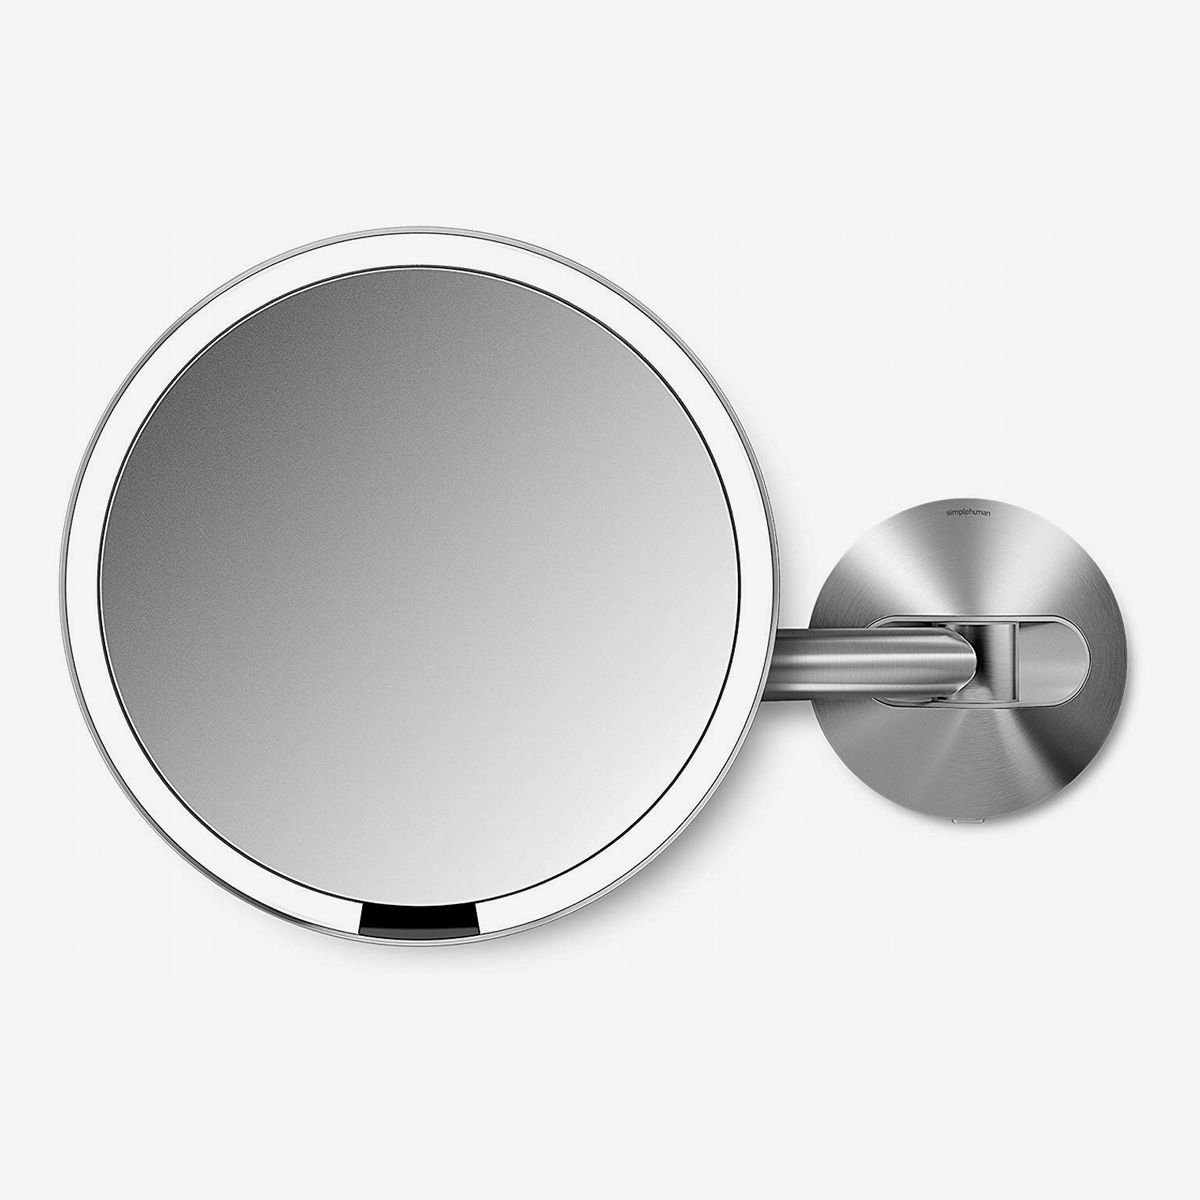 14 Best Lighted Makeup Mirrors 2022, Best Small Cosmetic Mirror